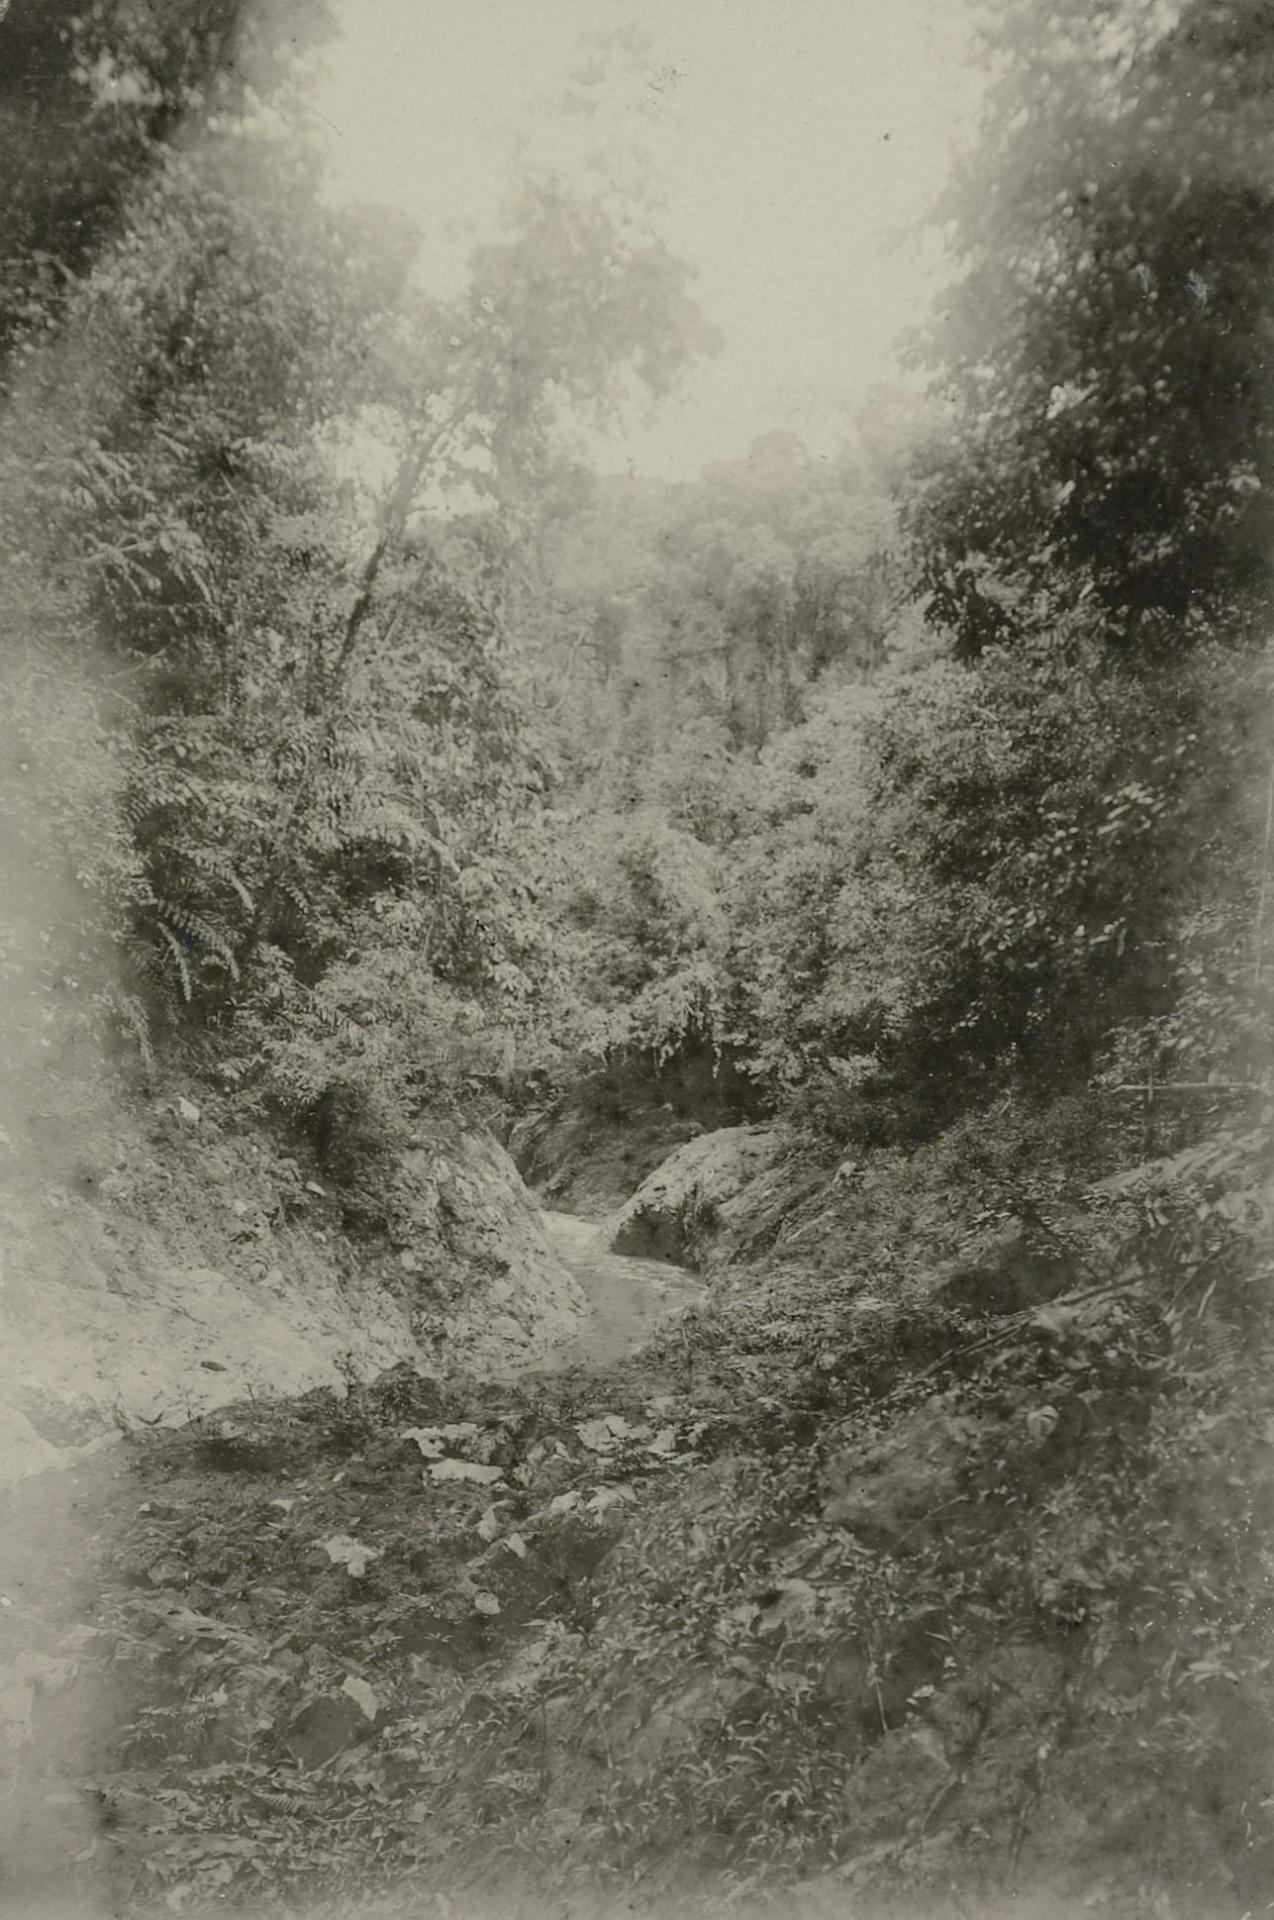 Mathol de Jong

The Valley of the Upper Seboeda River 
Expedition Justinus Nassau Series 9. Sembakoeng - Semboekoe - Sedalir - Tidoengsche countries - East Borneo, 1900
Exploration tour of the Tidoengsche countries led by the captain of the General Staff P. van Genderen Stort
(Kern Photography Collection, National Museum of Ethnology)